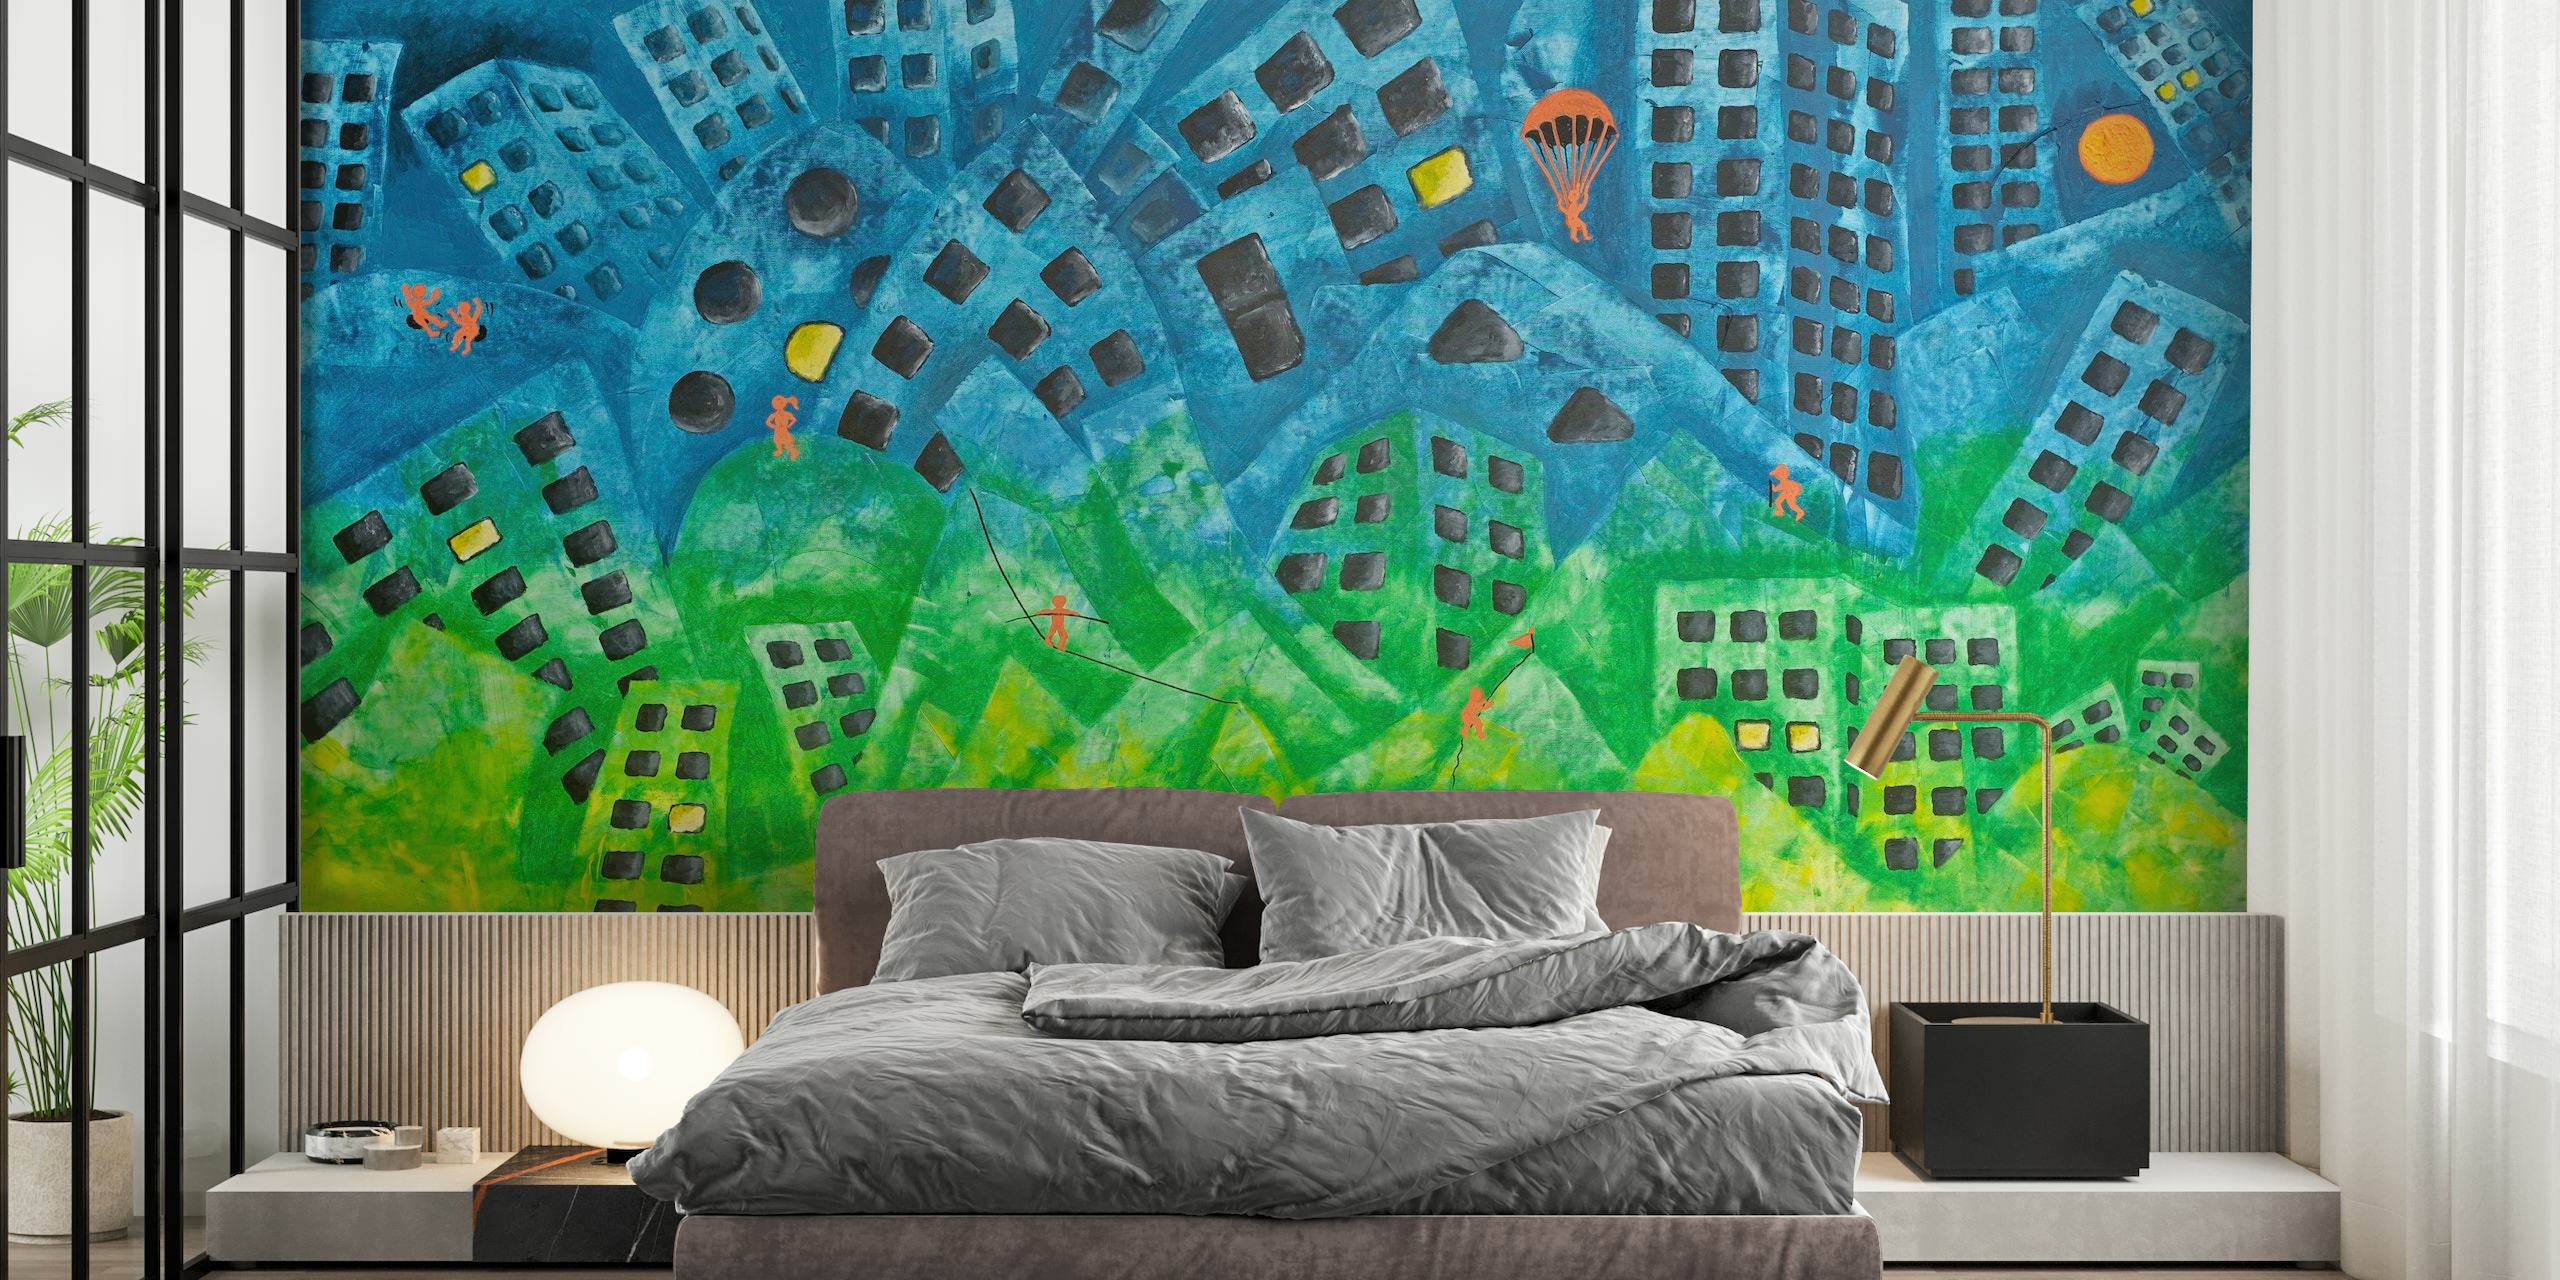 Abstract urban cityscape wall mural with whimsical skyscrapers and vibrant colors